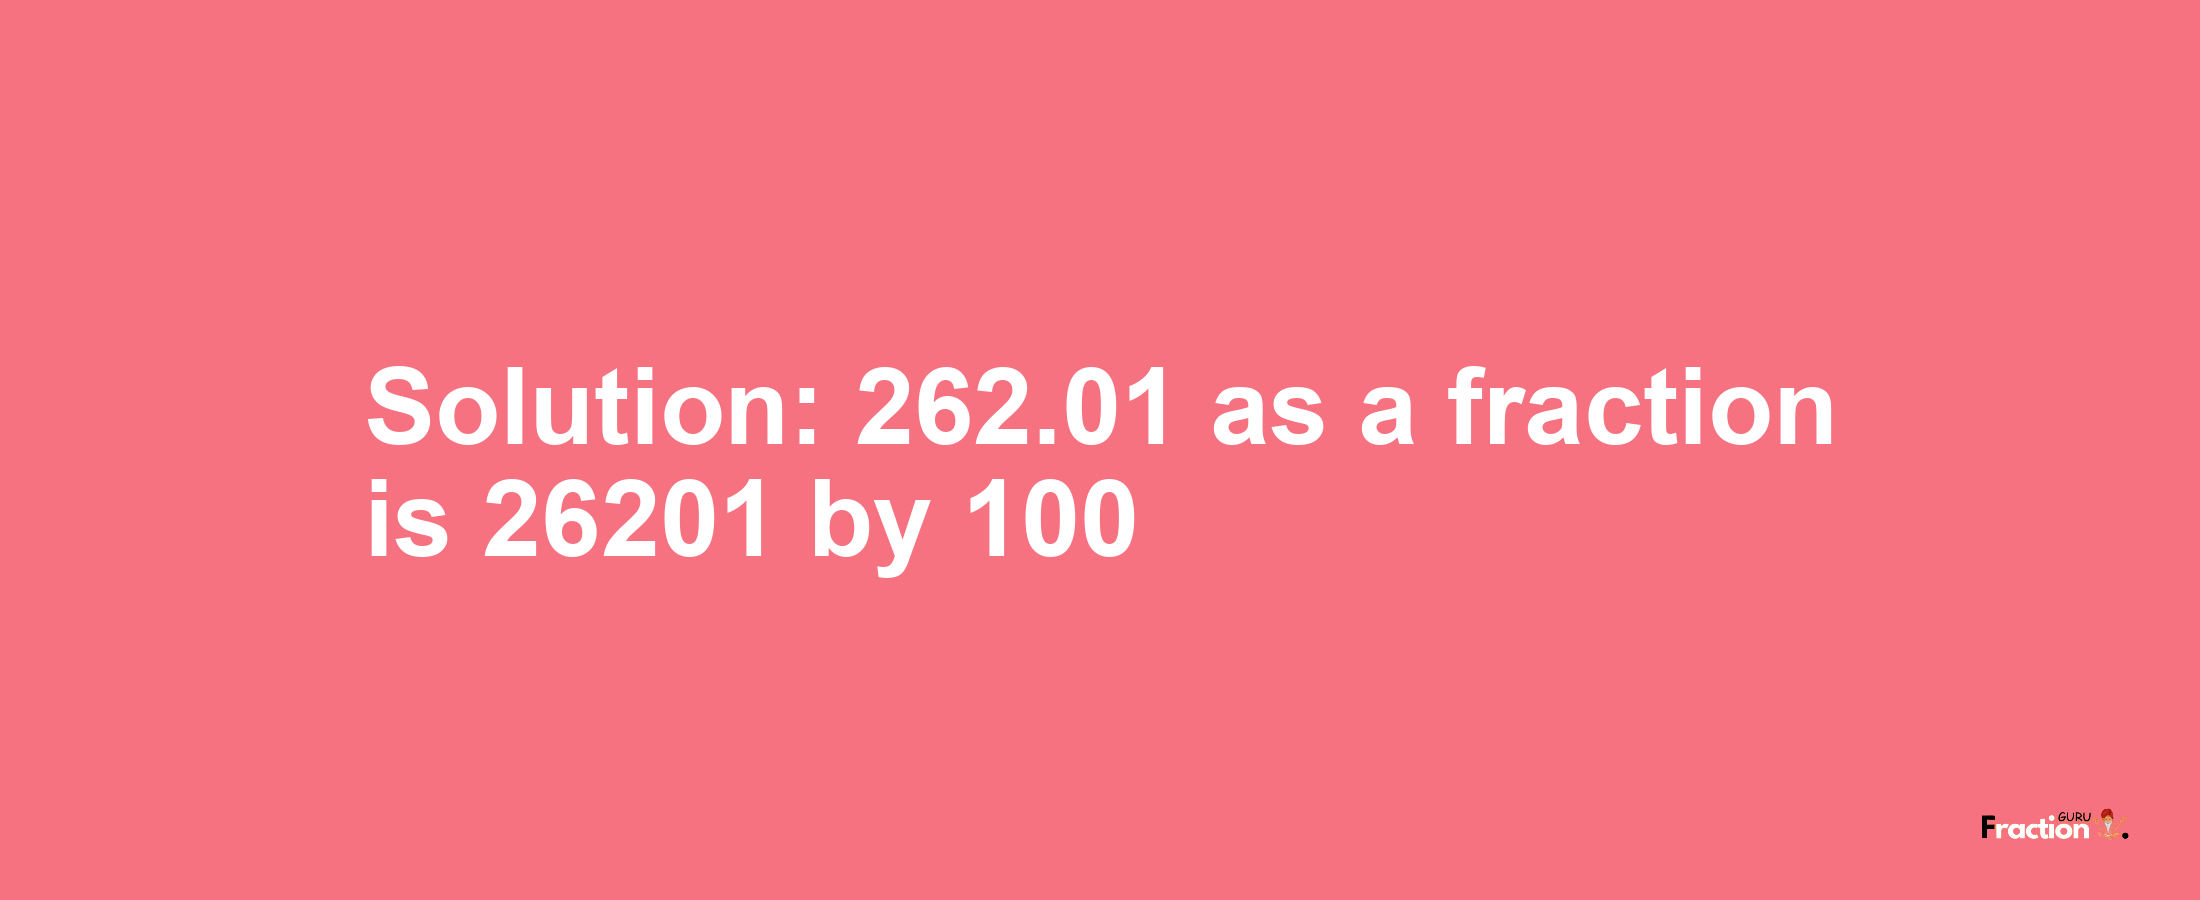 Solution:262.01 as a fraction is 26201/100